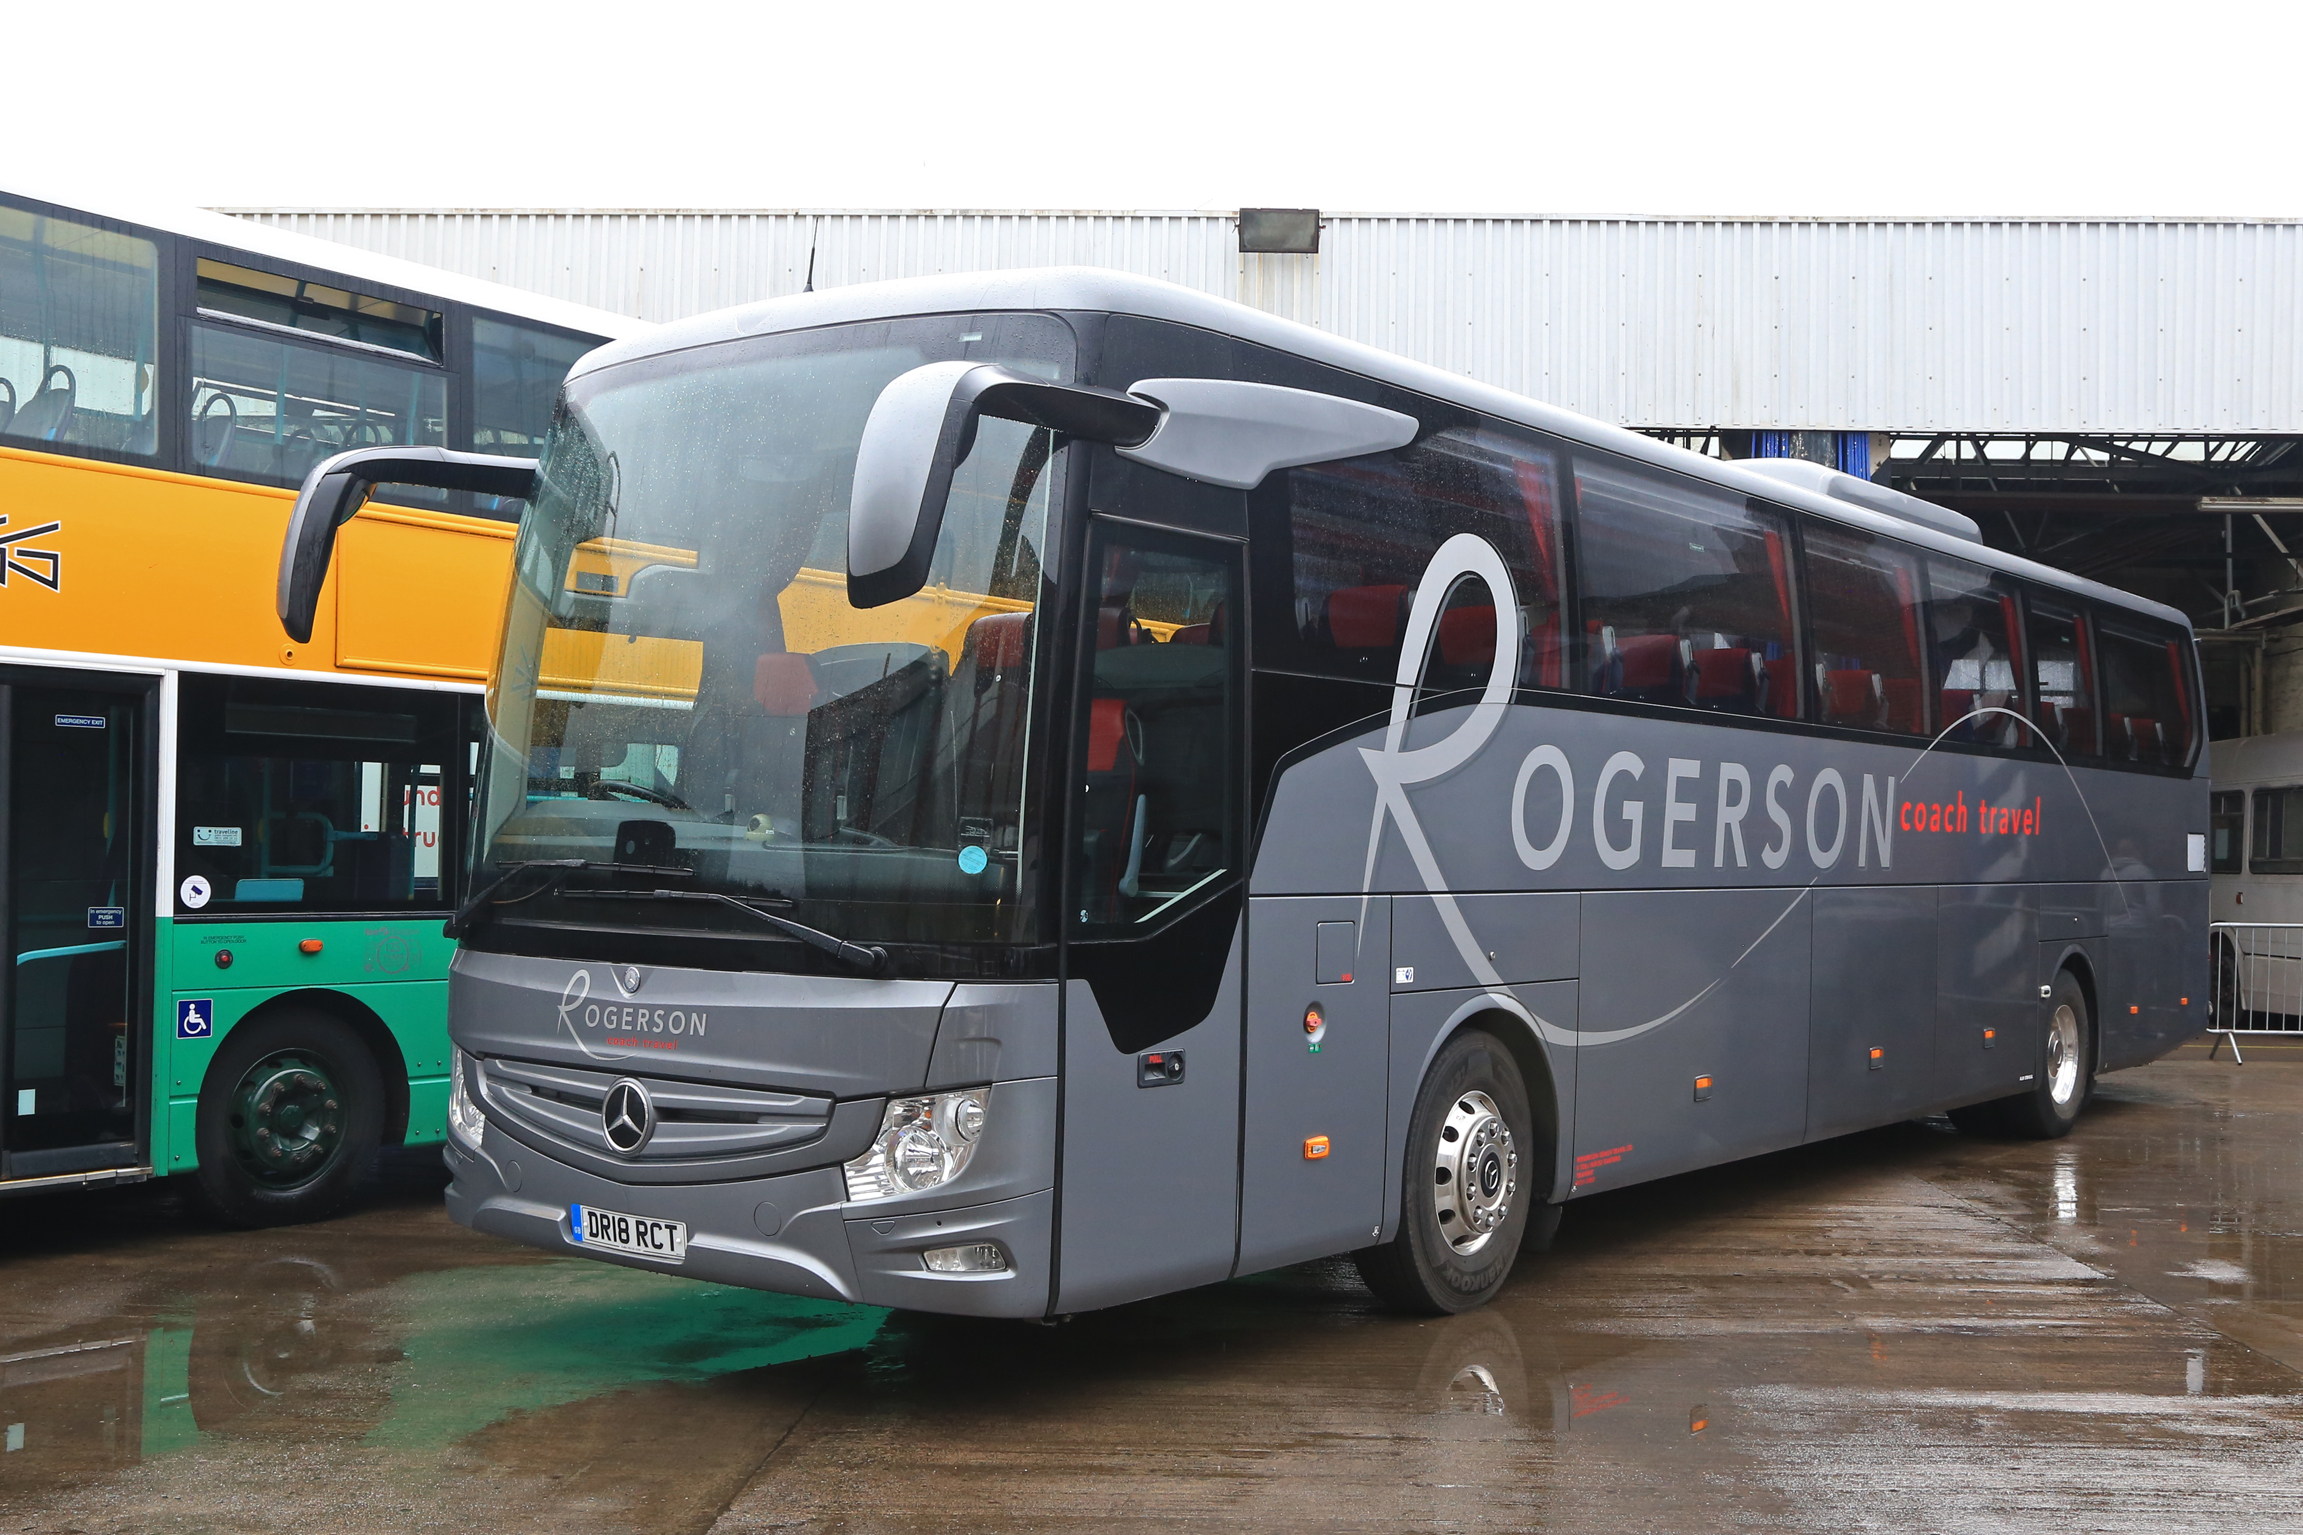 Rogerson Coach Travel of Tranent’s Tourismo was part of the visiting vehicle display on the Saturday